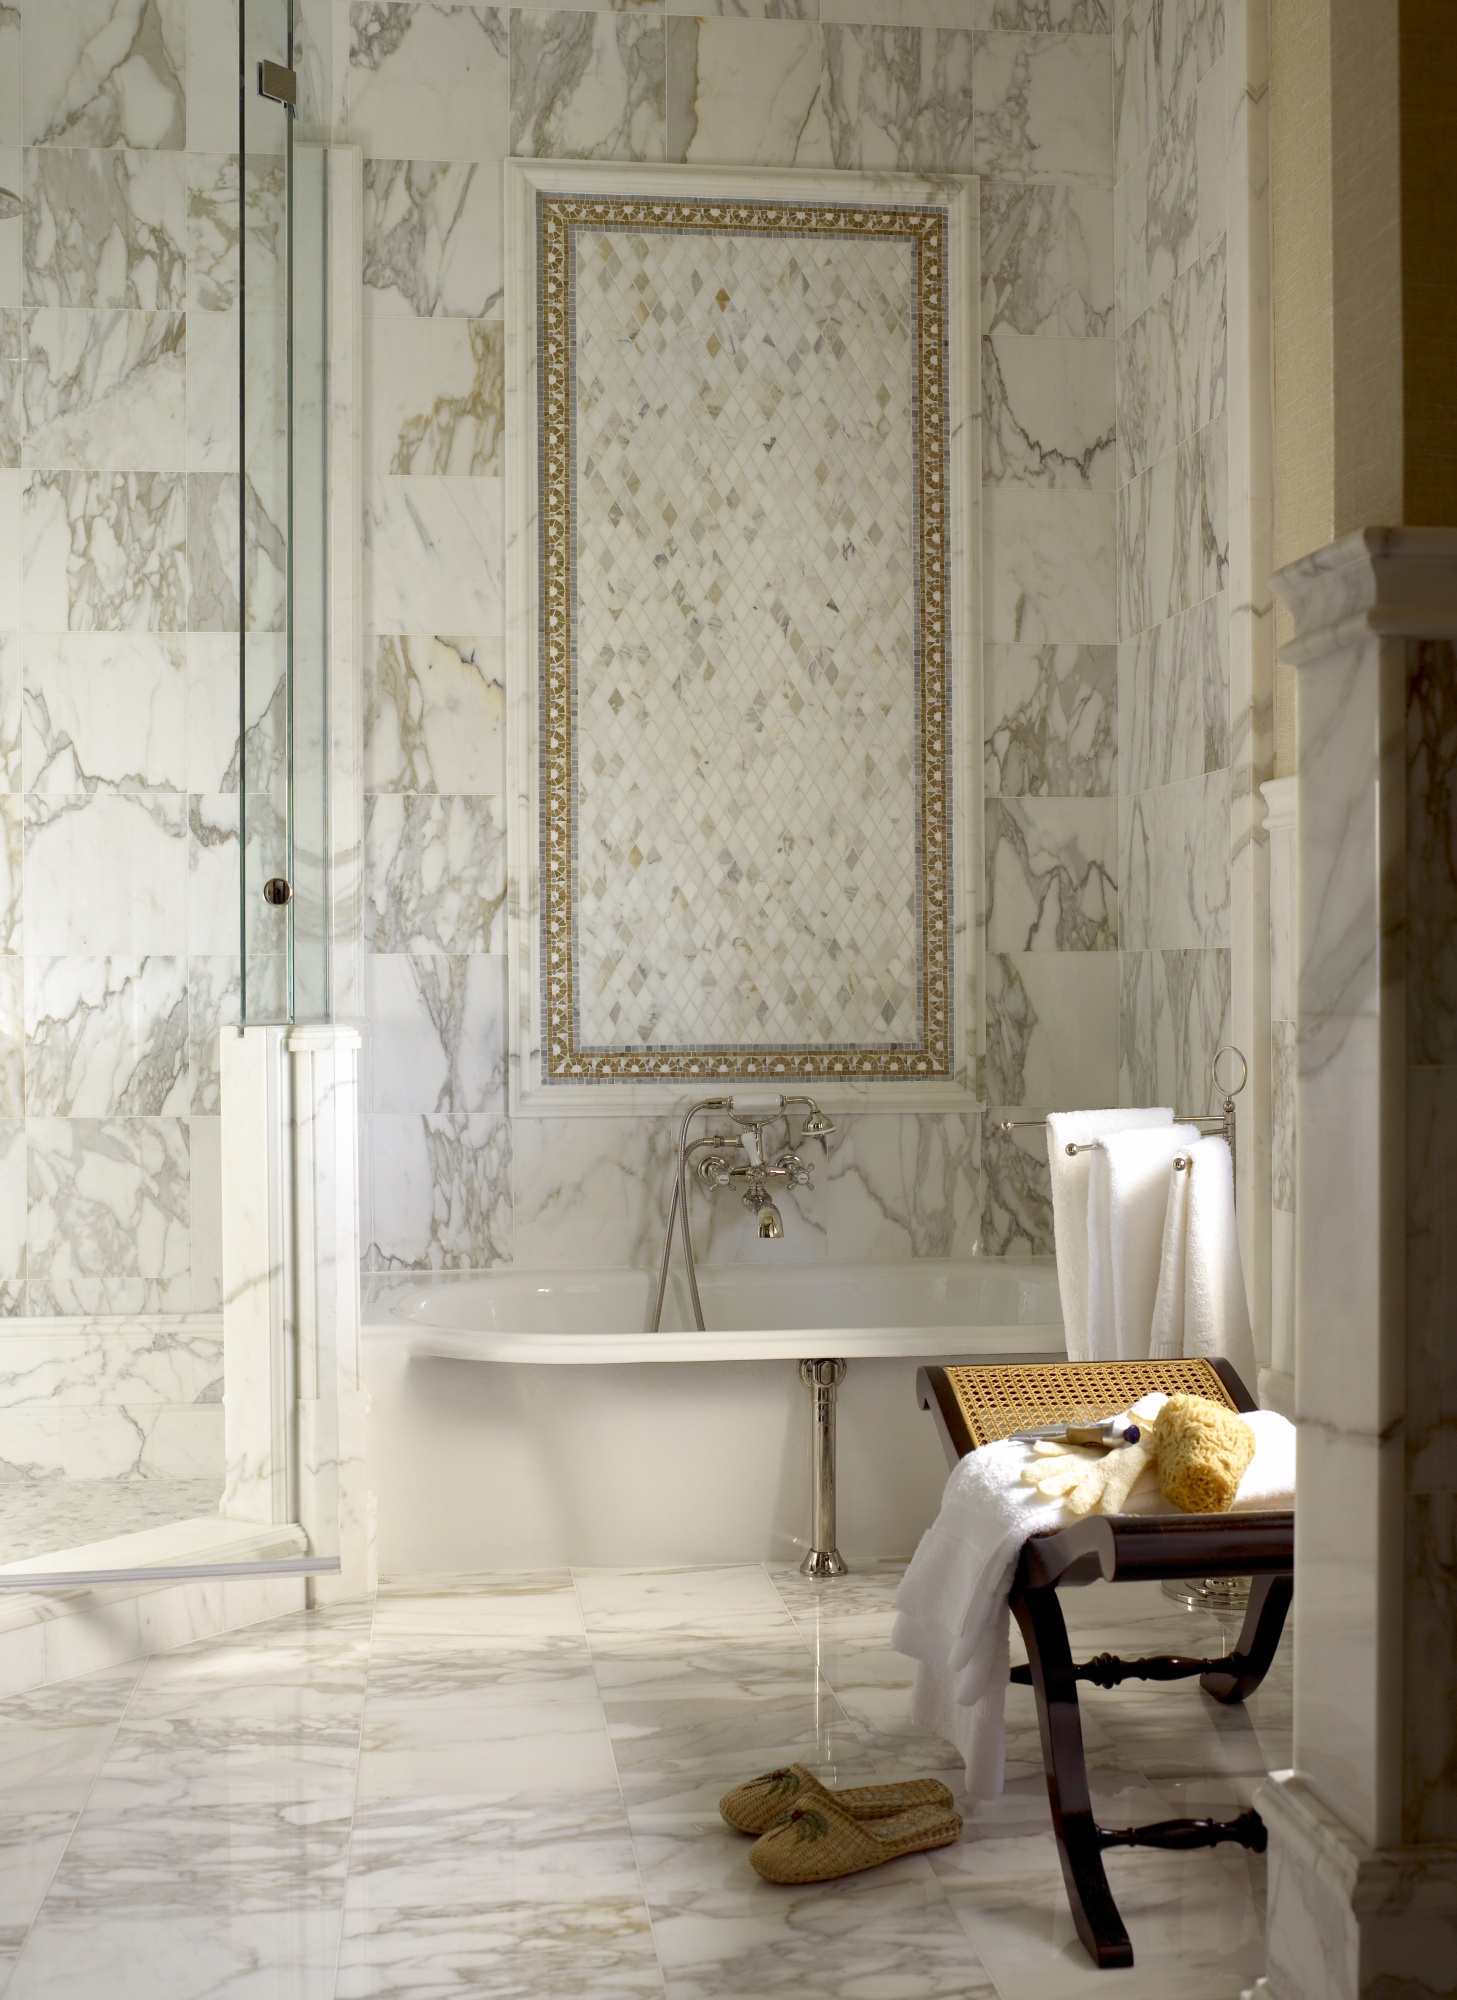 Marble mosaic tiles and nickel finishes within this guest bathroom.